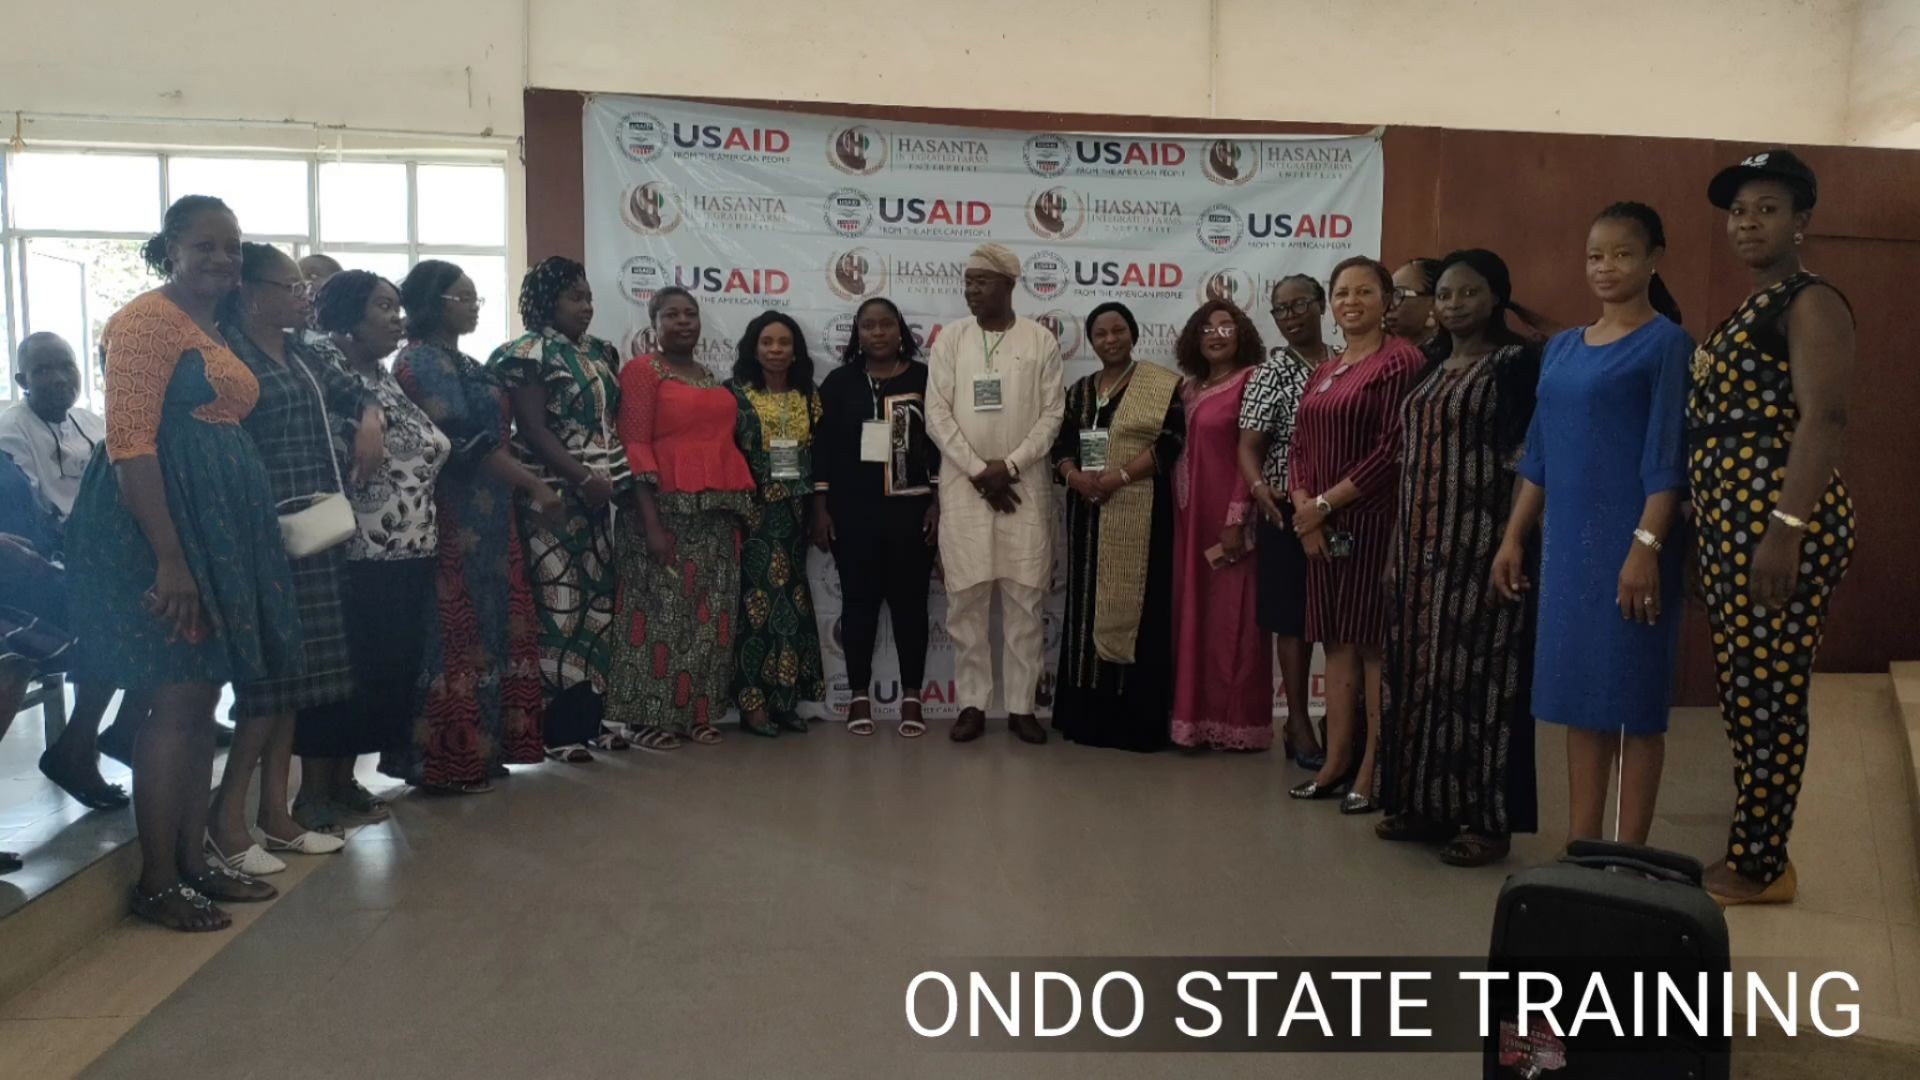 Ondo State - Practical Fish Farming Value Chain Training for Youth & Women - Nigeria